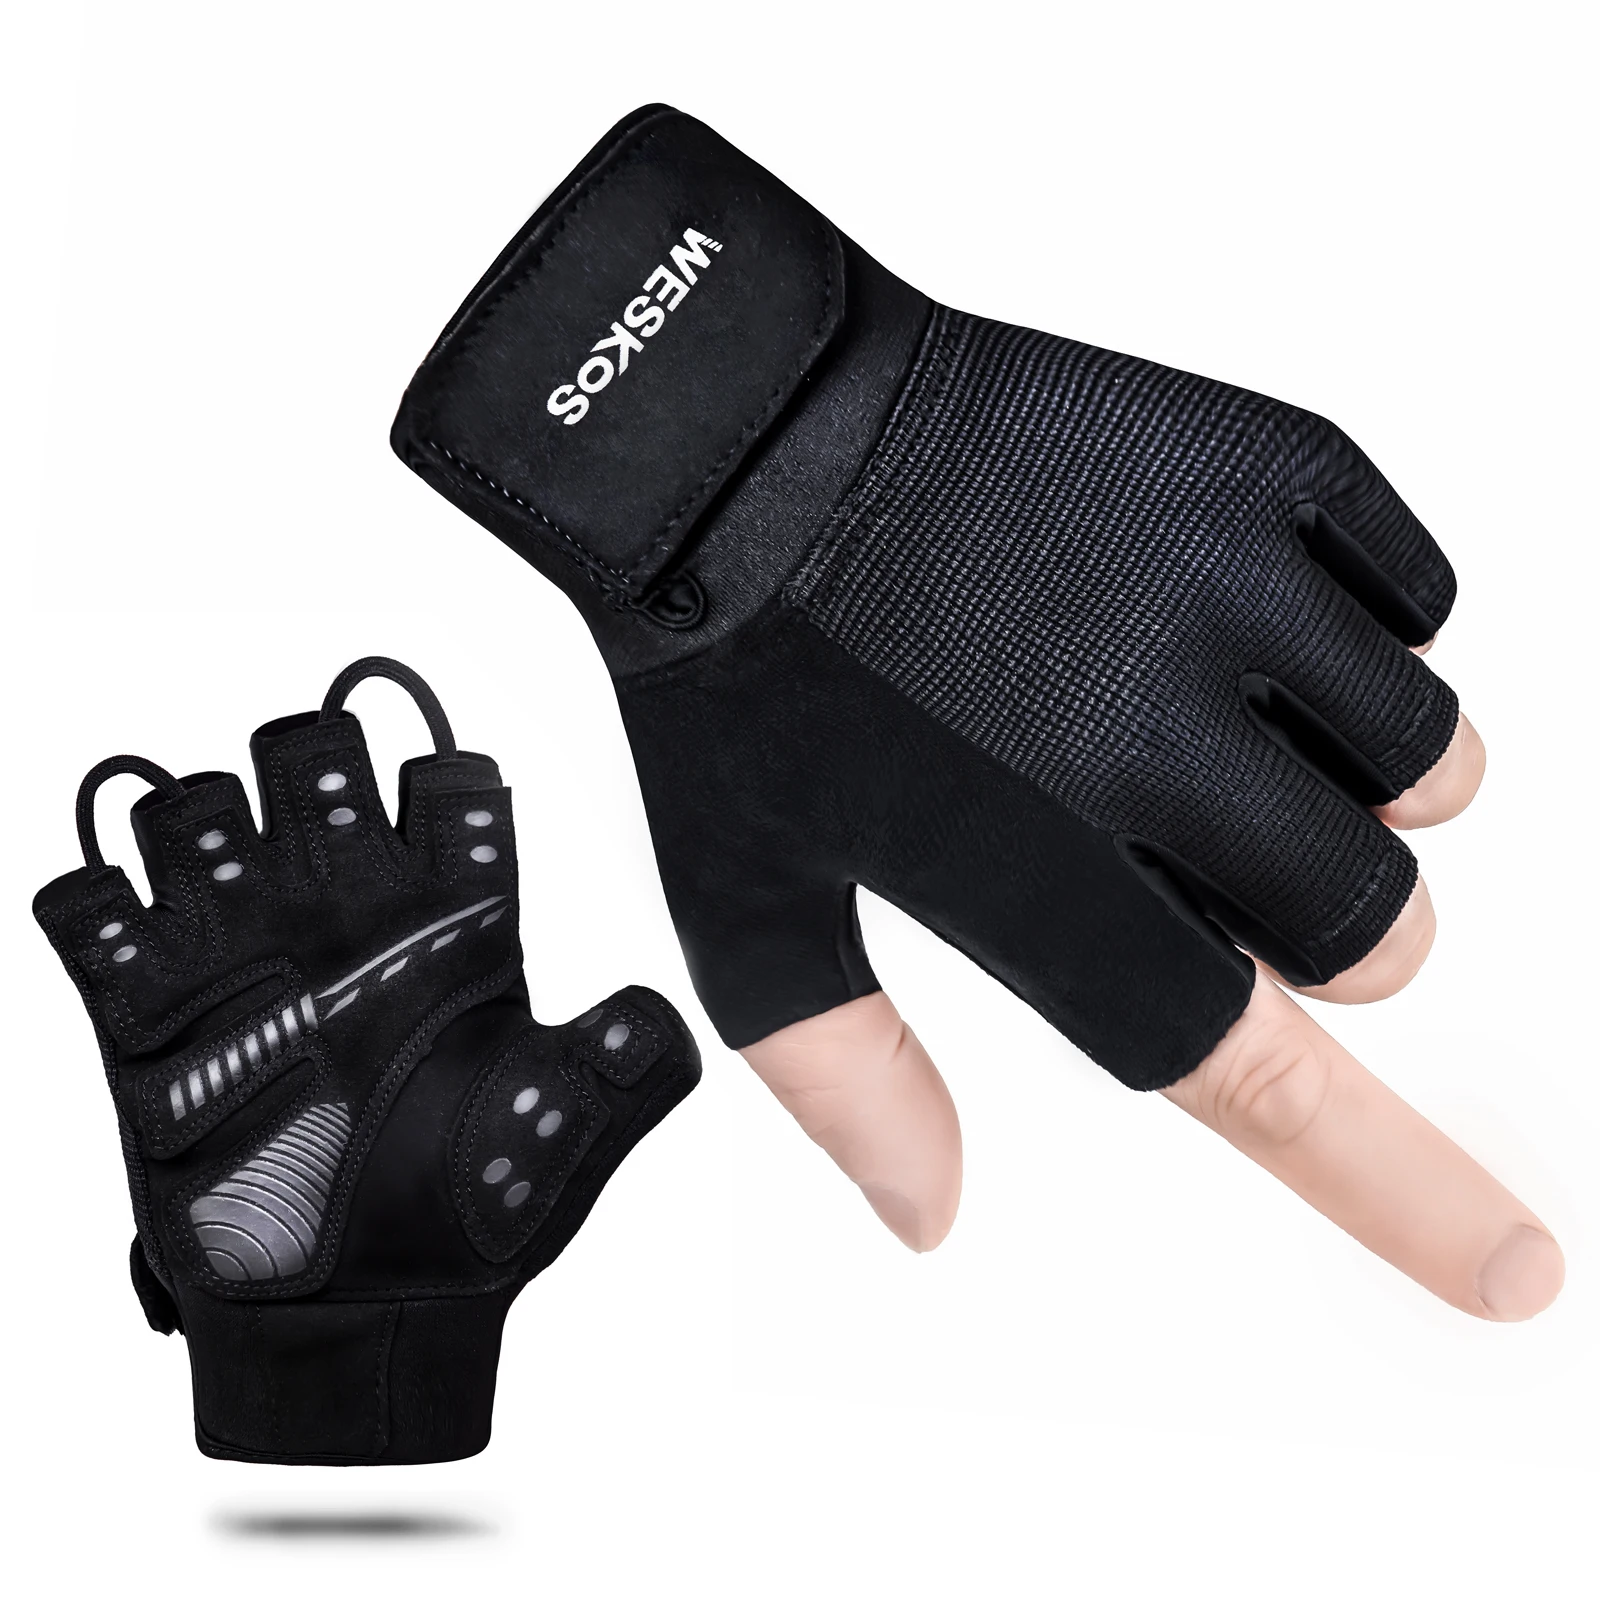 Weskos Gym Gym Fitness Gloves weightlifting exercise men's and women's Gloves